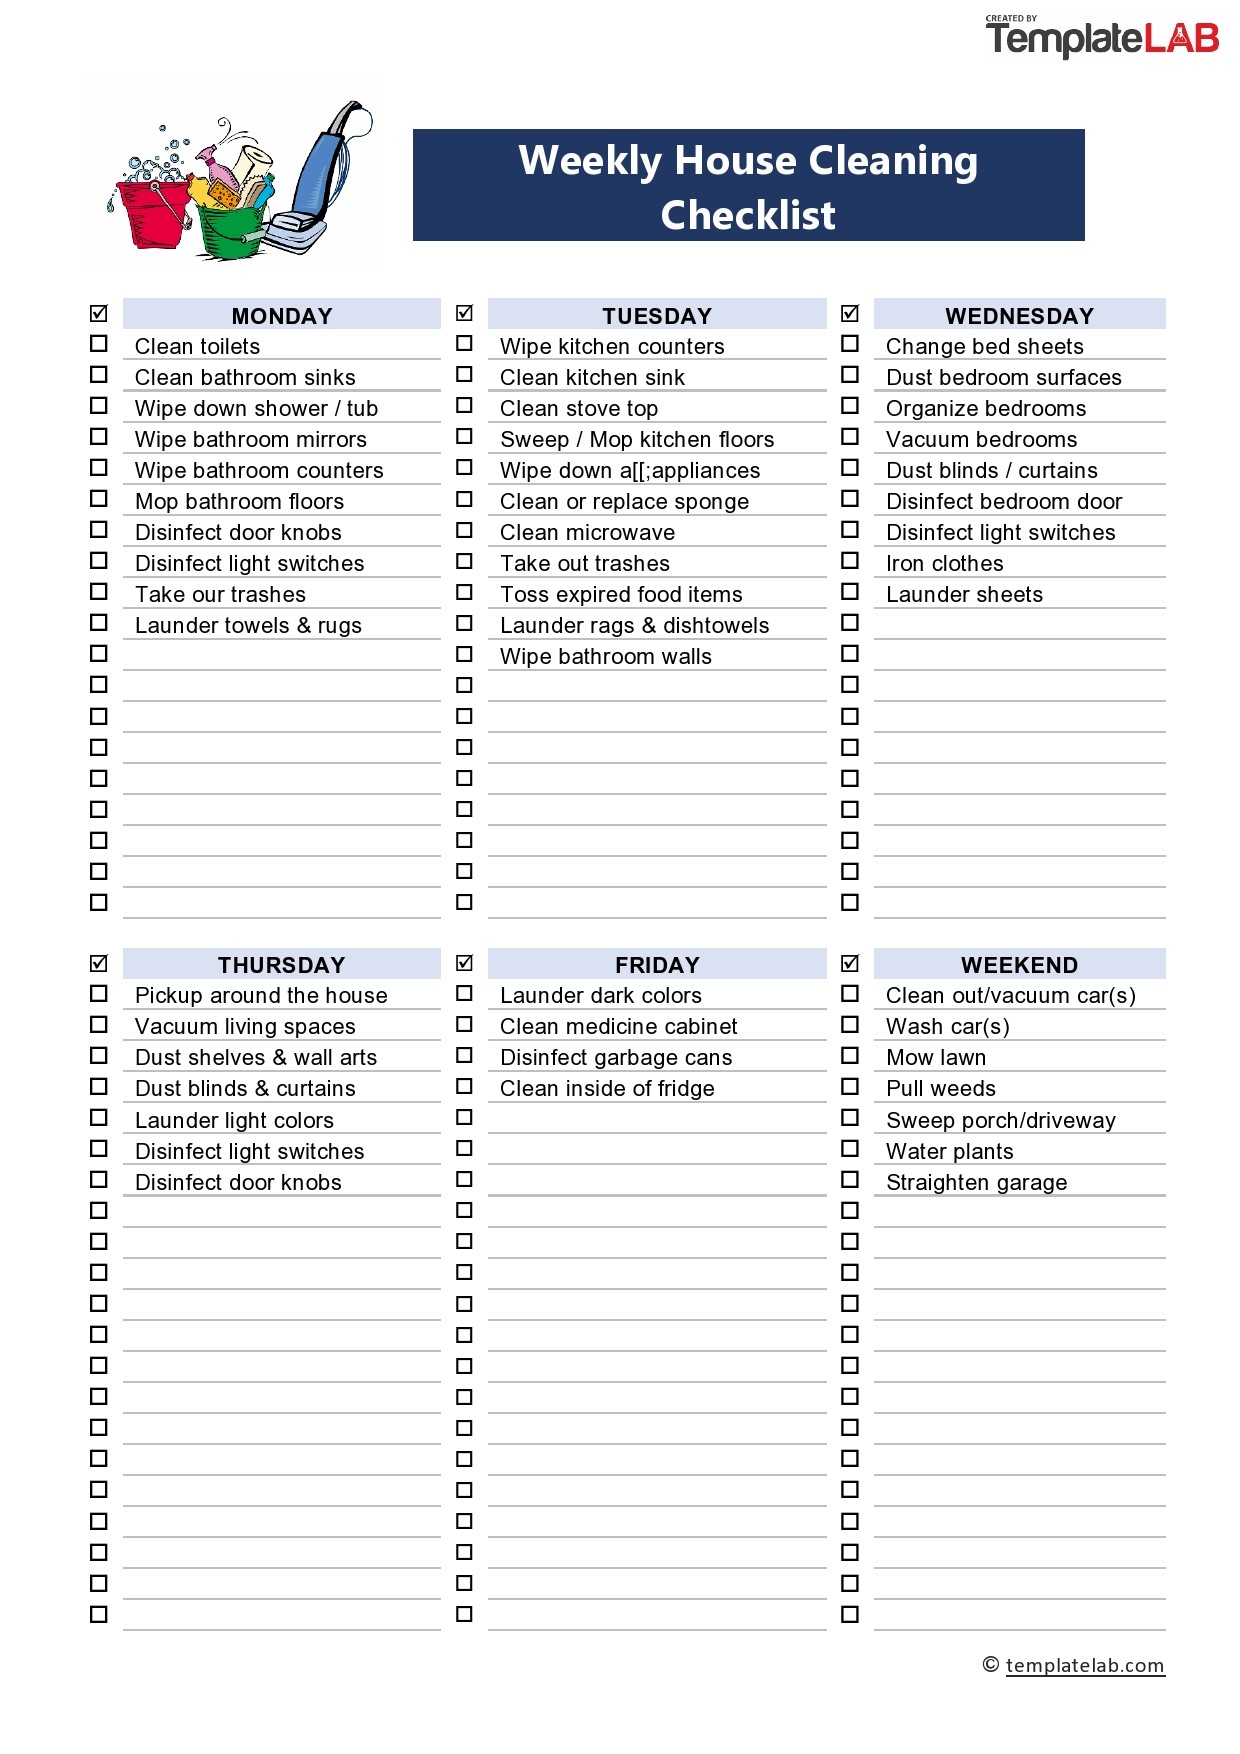 Free Weekly House Cleaning Checklist - TemplateLab